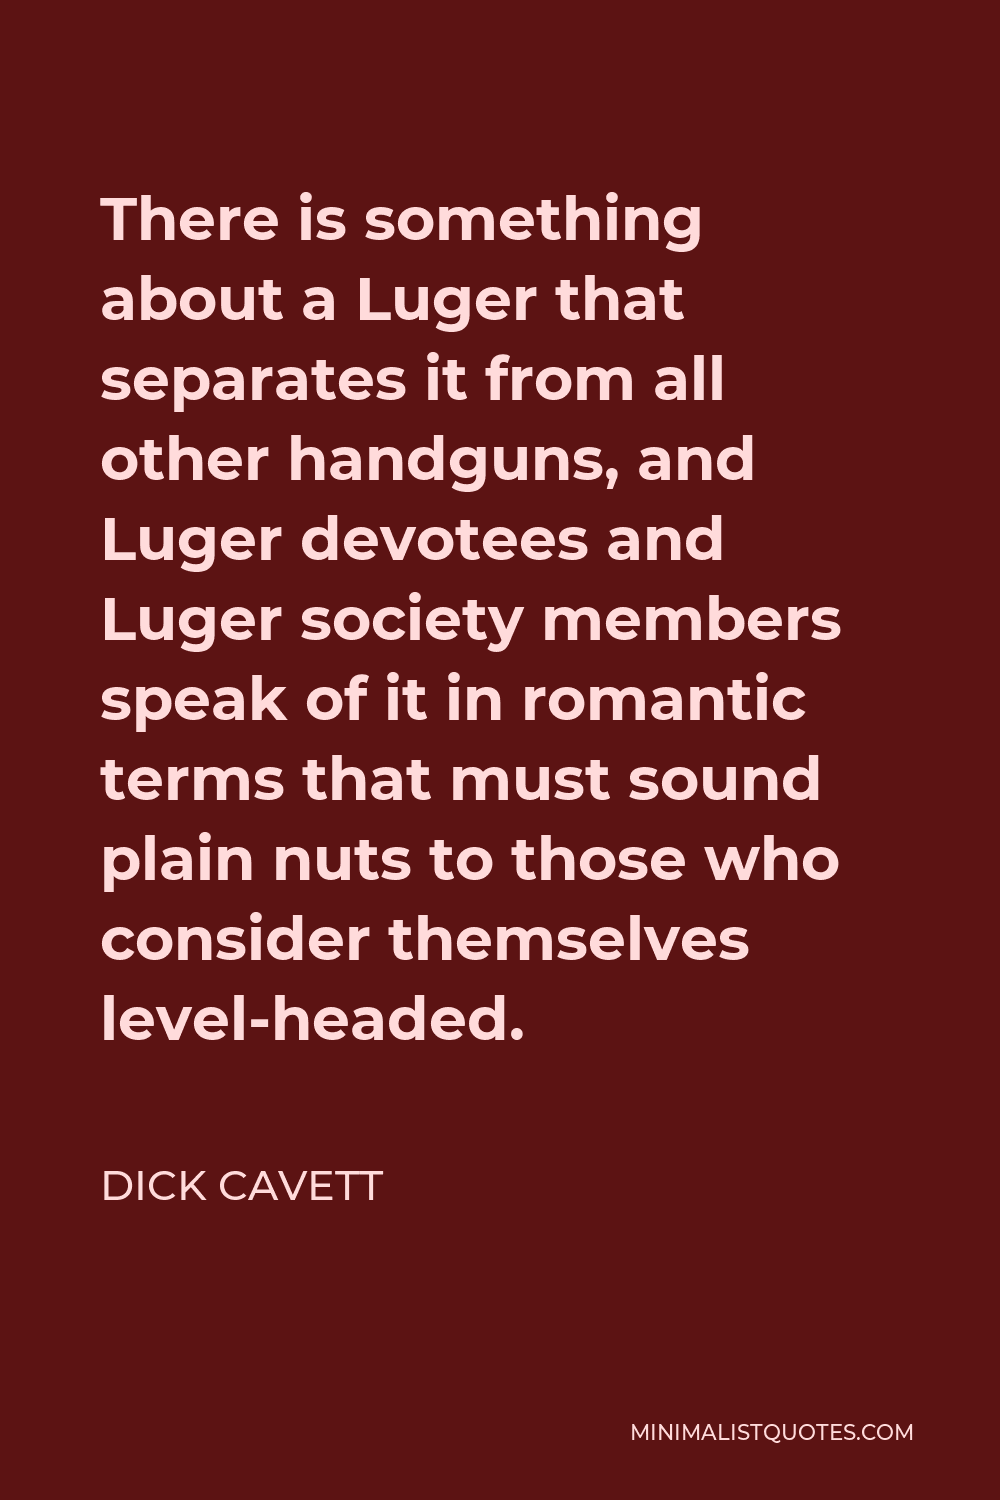 Dick Cavett Quote - There is something about a Luger that separates it from all other handguns, and Luger devotees and Luger society members speak of it in romantic terms that must sound plain nuts to those who consider themselves level-headed.